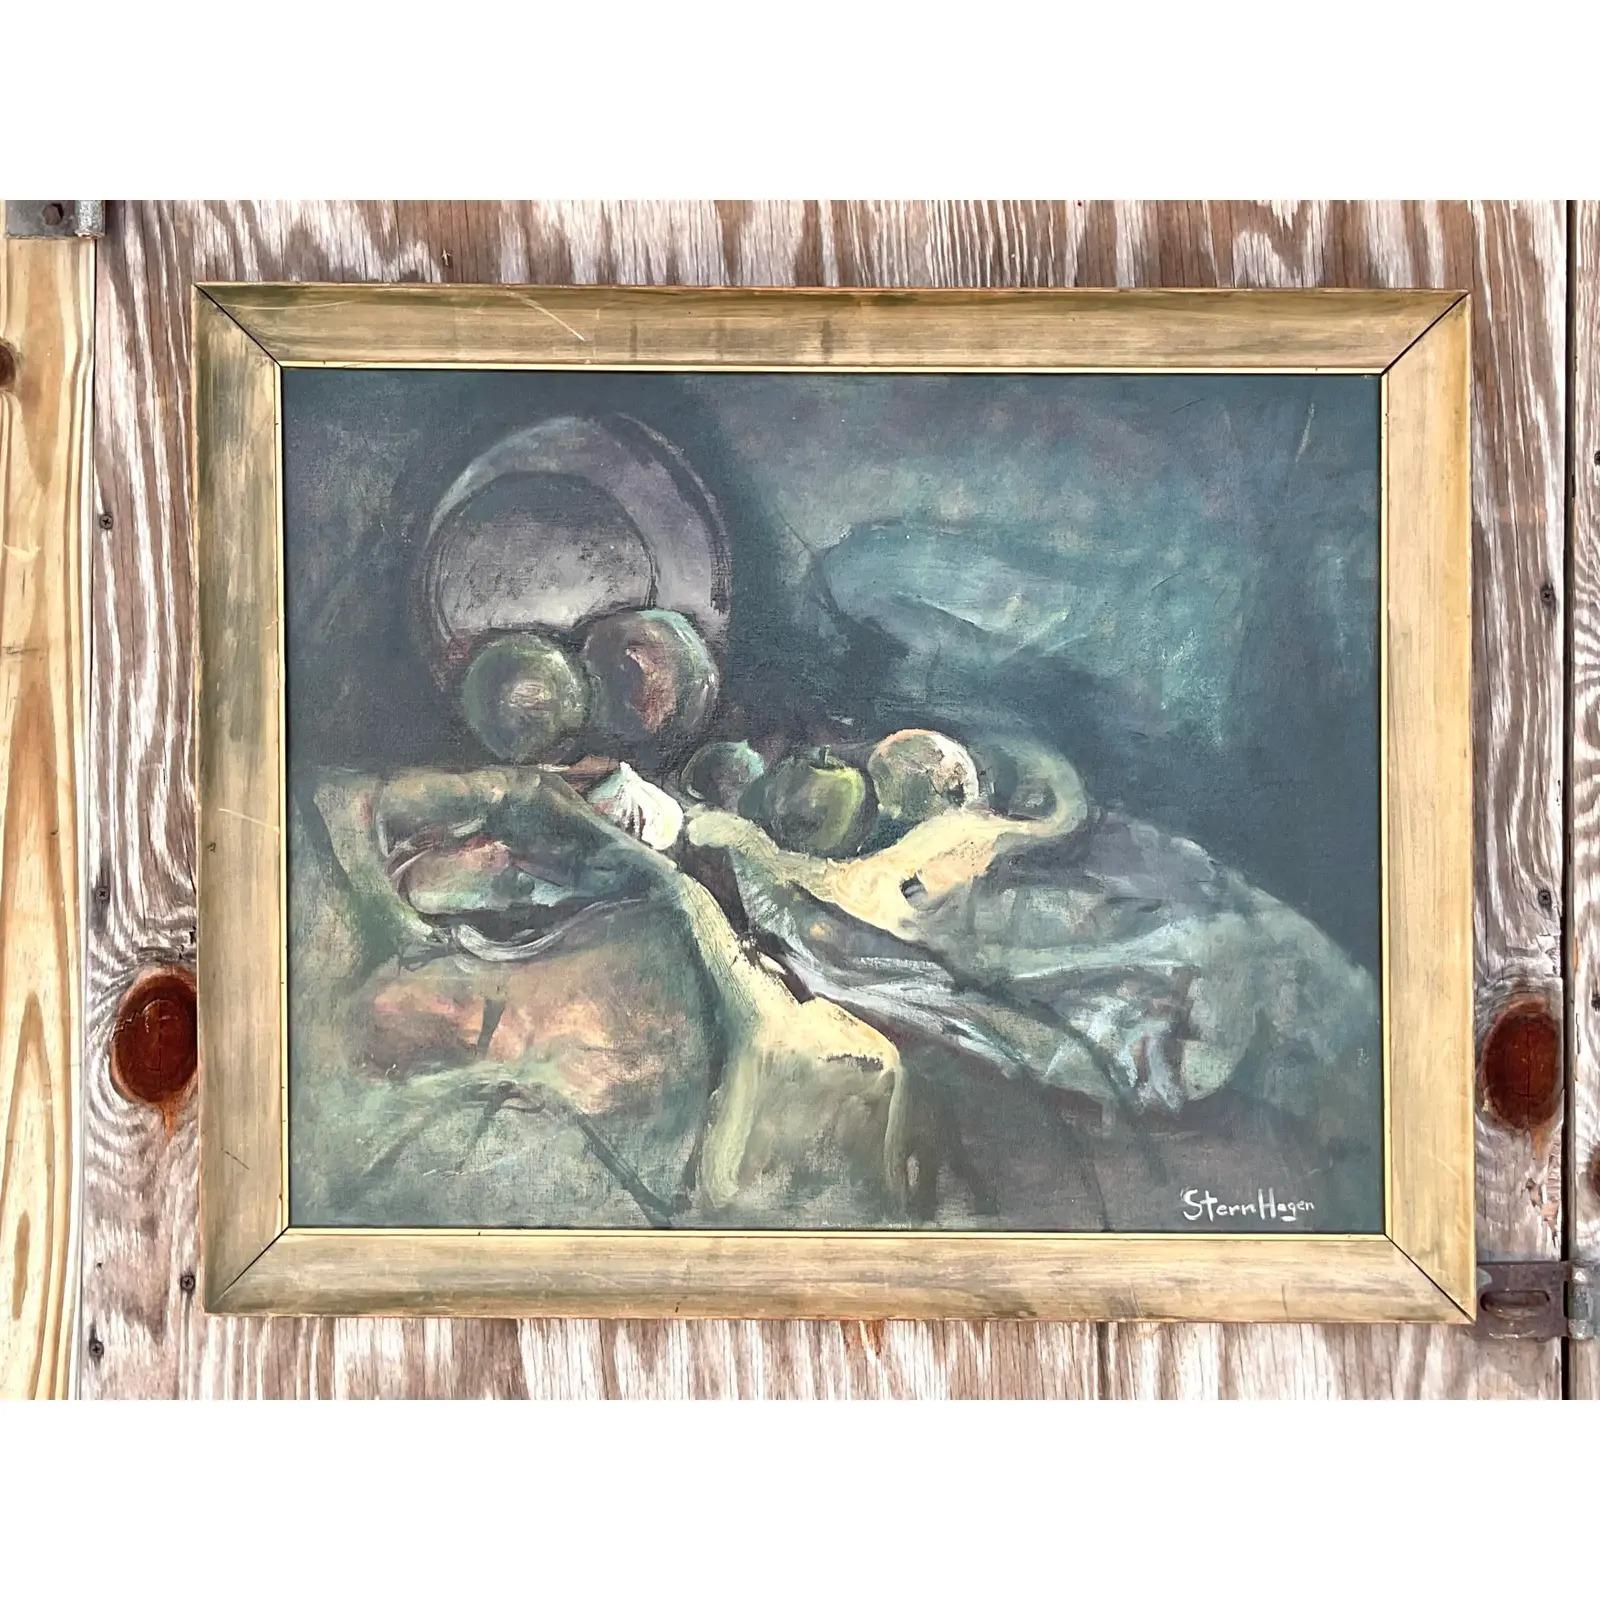 Vintage Boho Original Oil Painting Signed Stern Hagen In Good Condition For Sale In west palm beach, FL